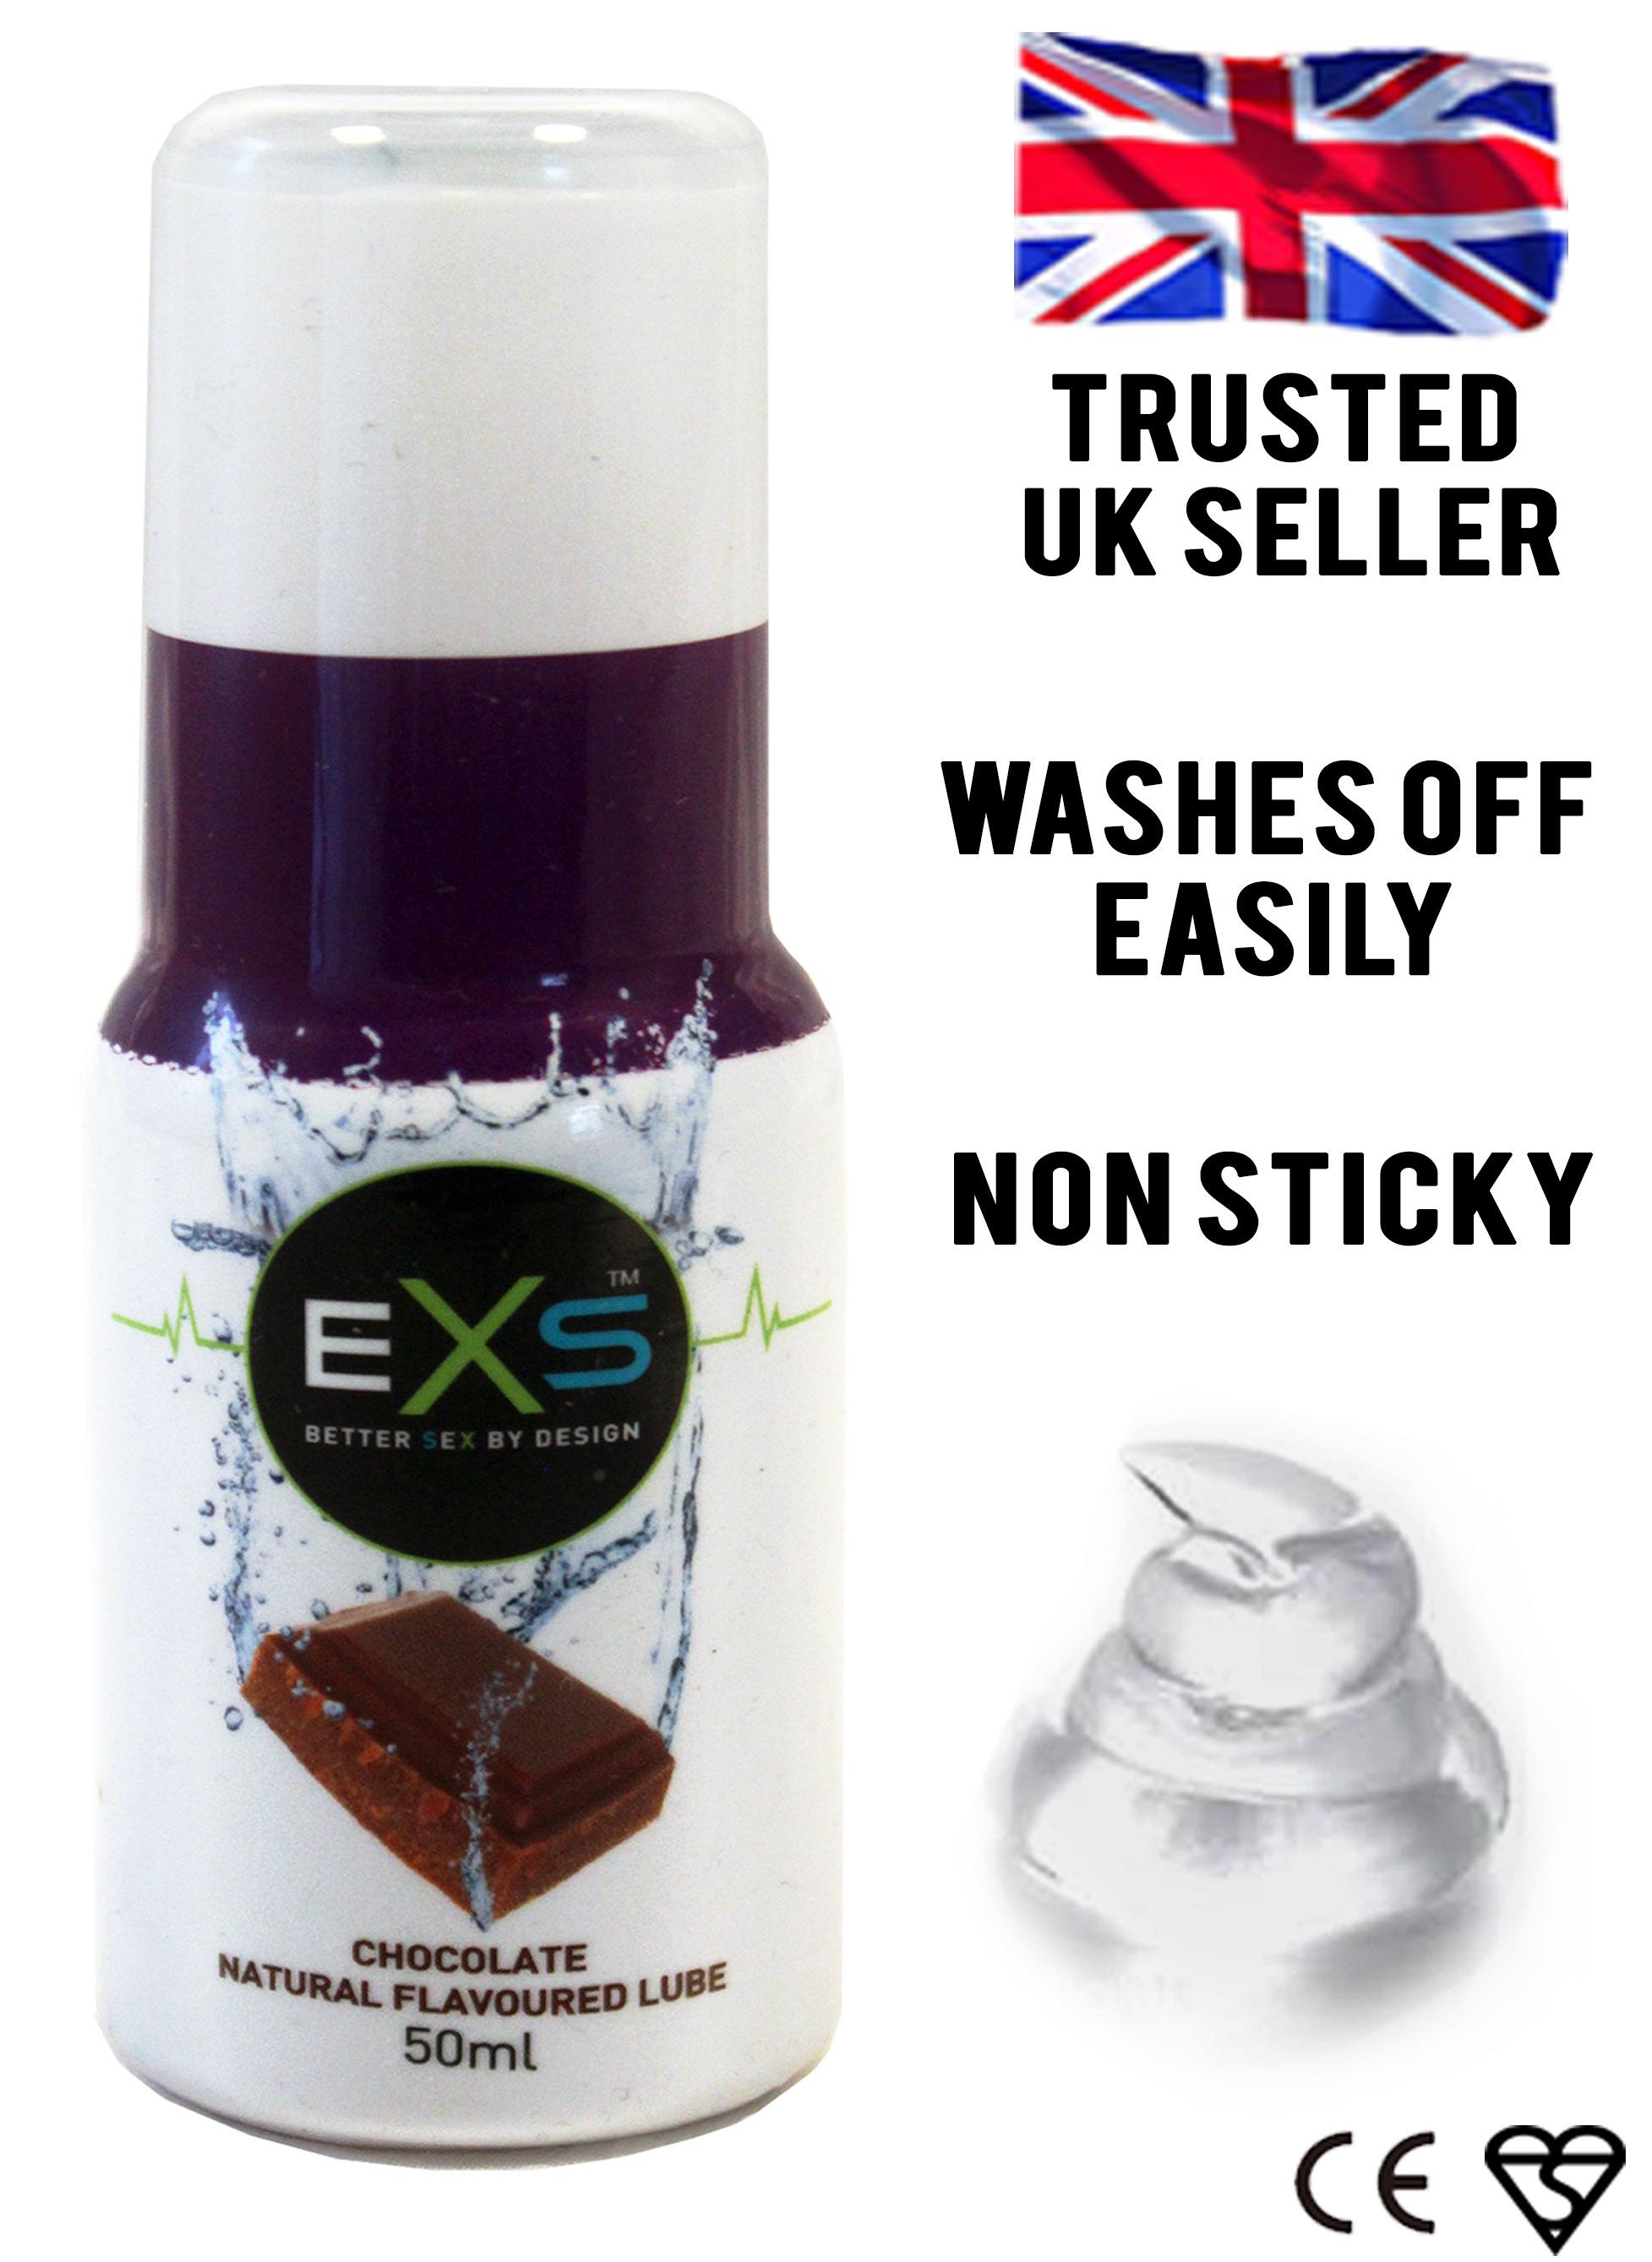 EXS Chocolate Lube Bottle 50ml with information